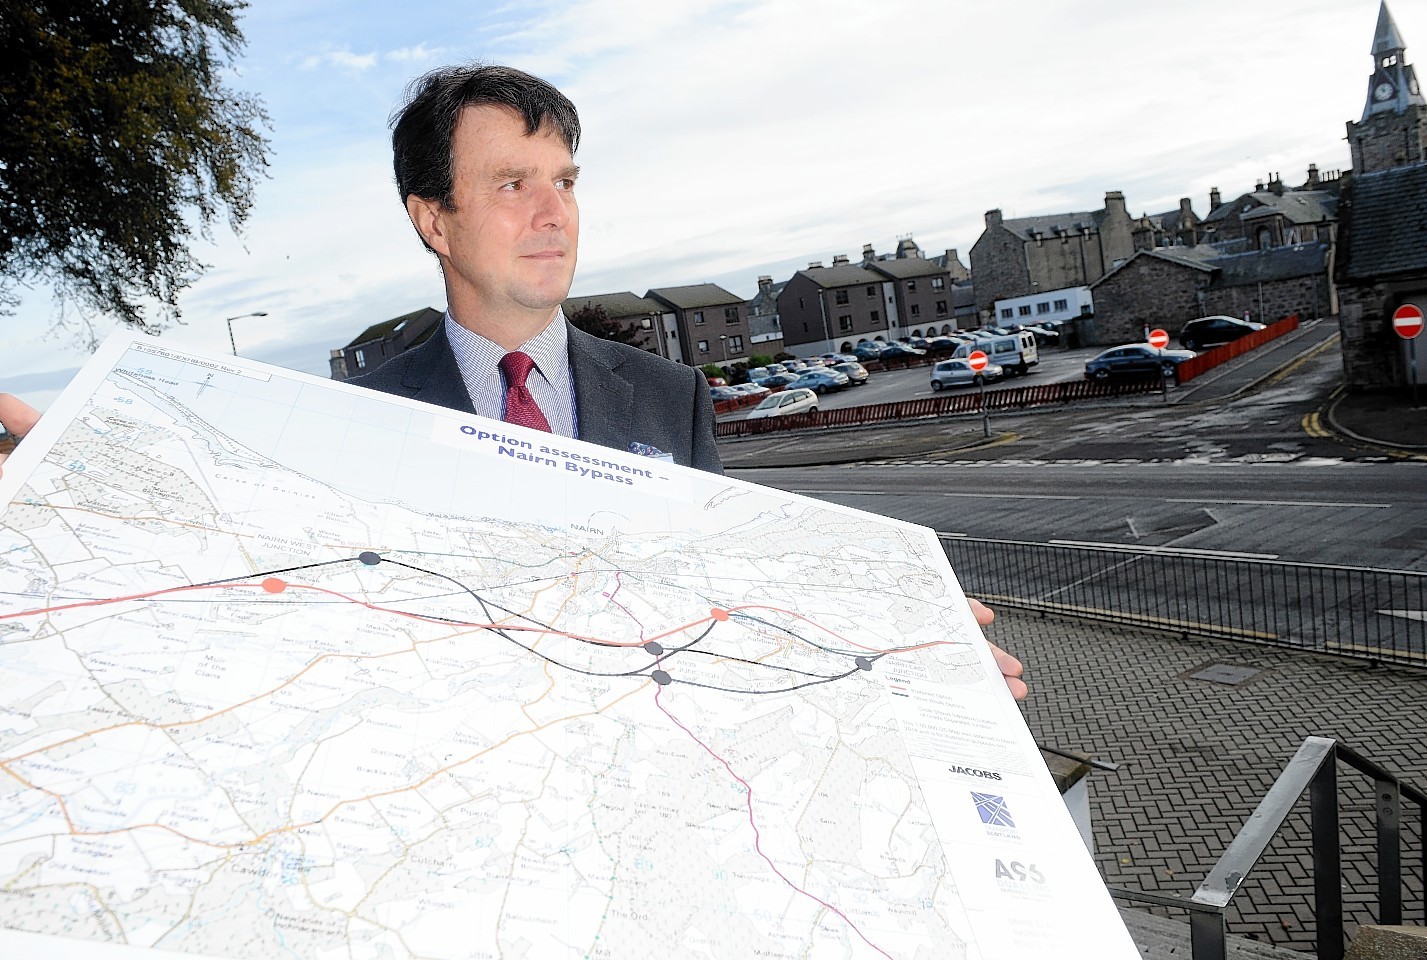 Transport Scotland's head of planning David Anderson shows the plans for Nairn.